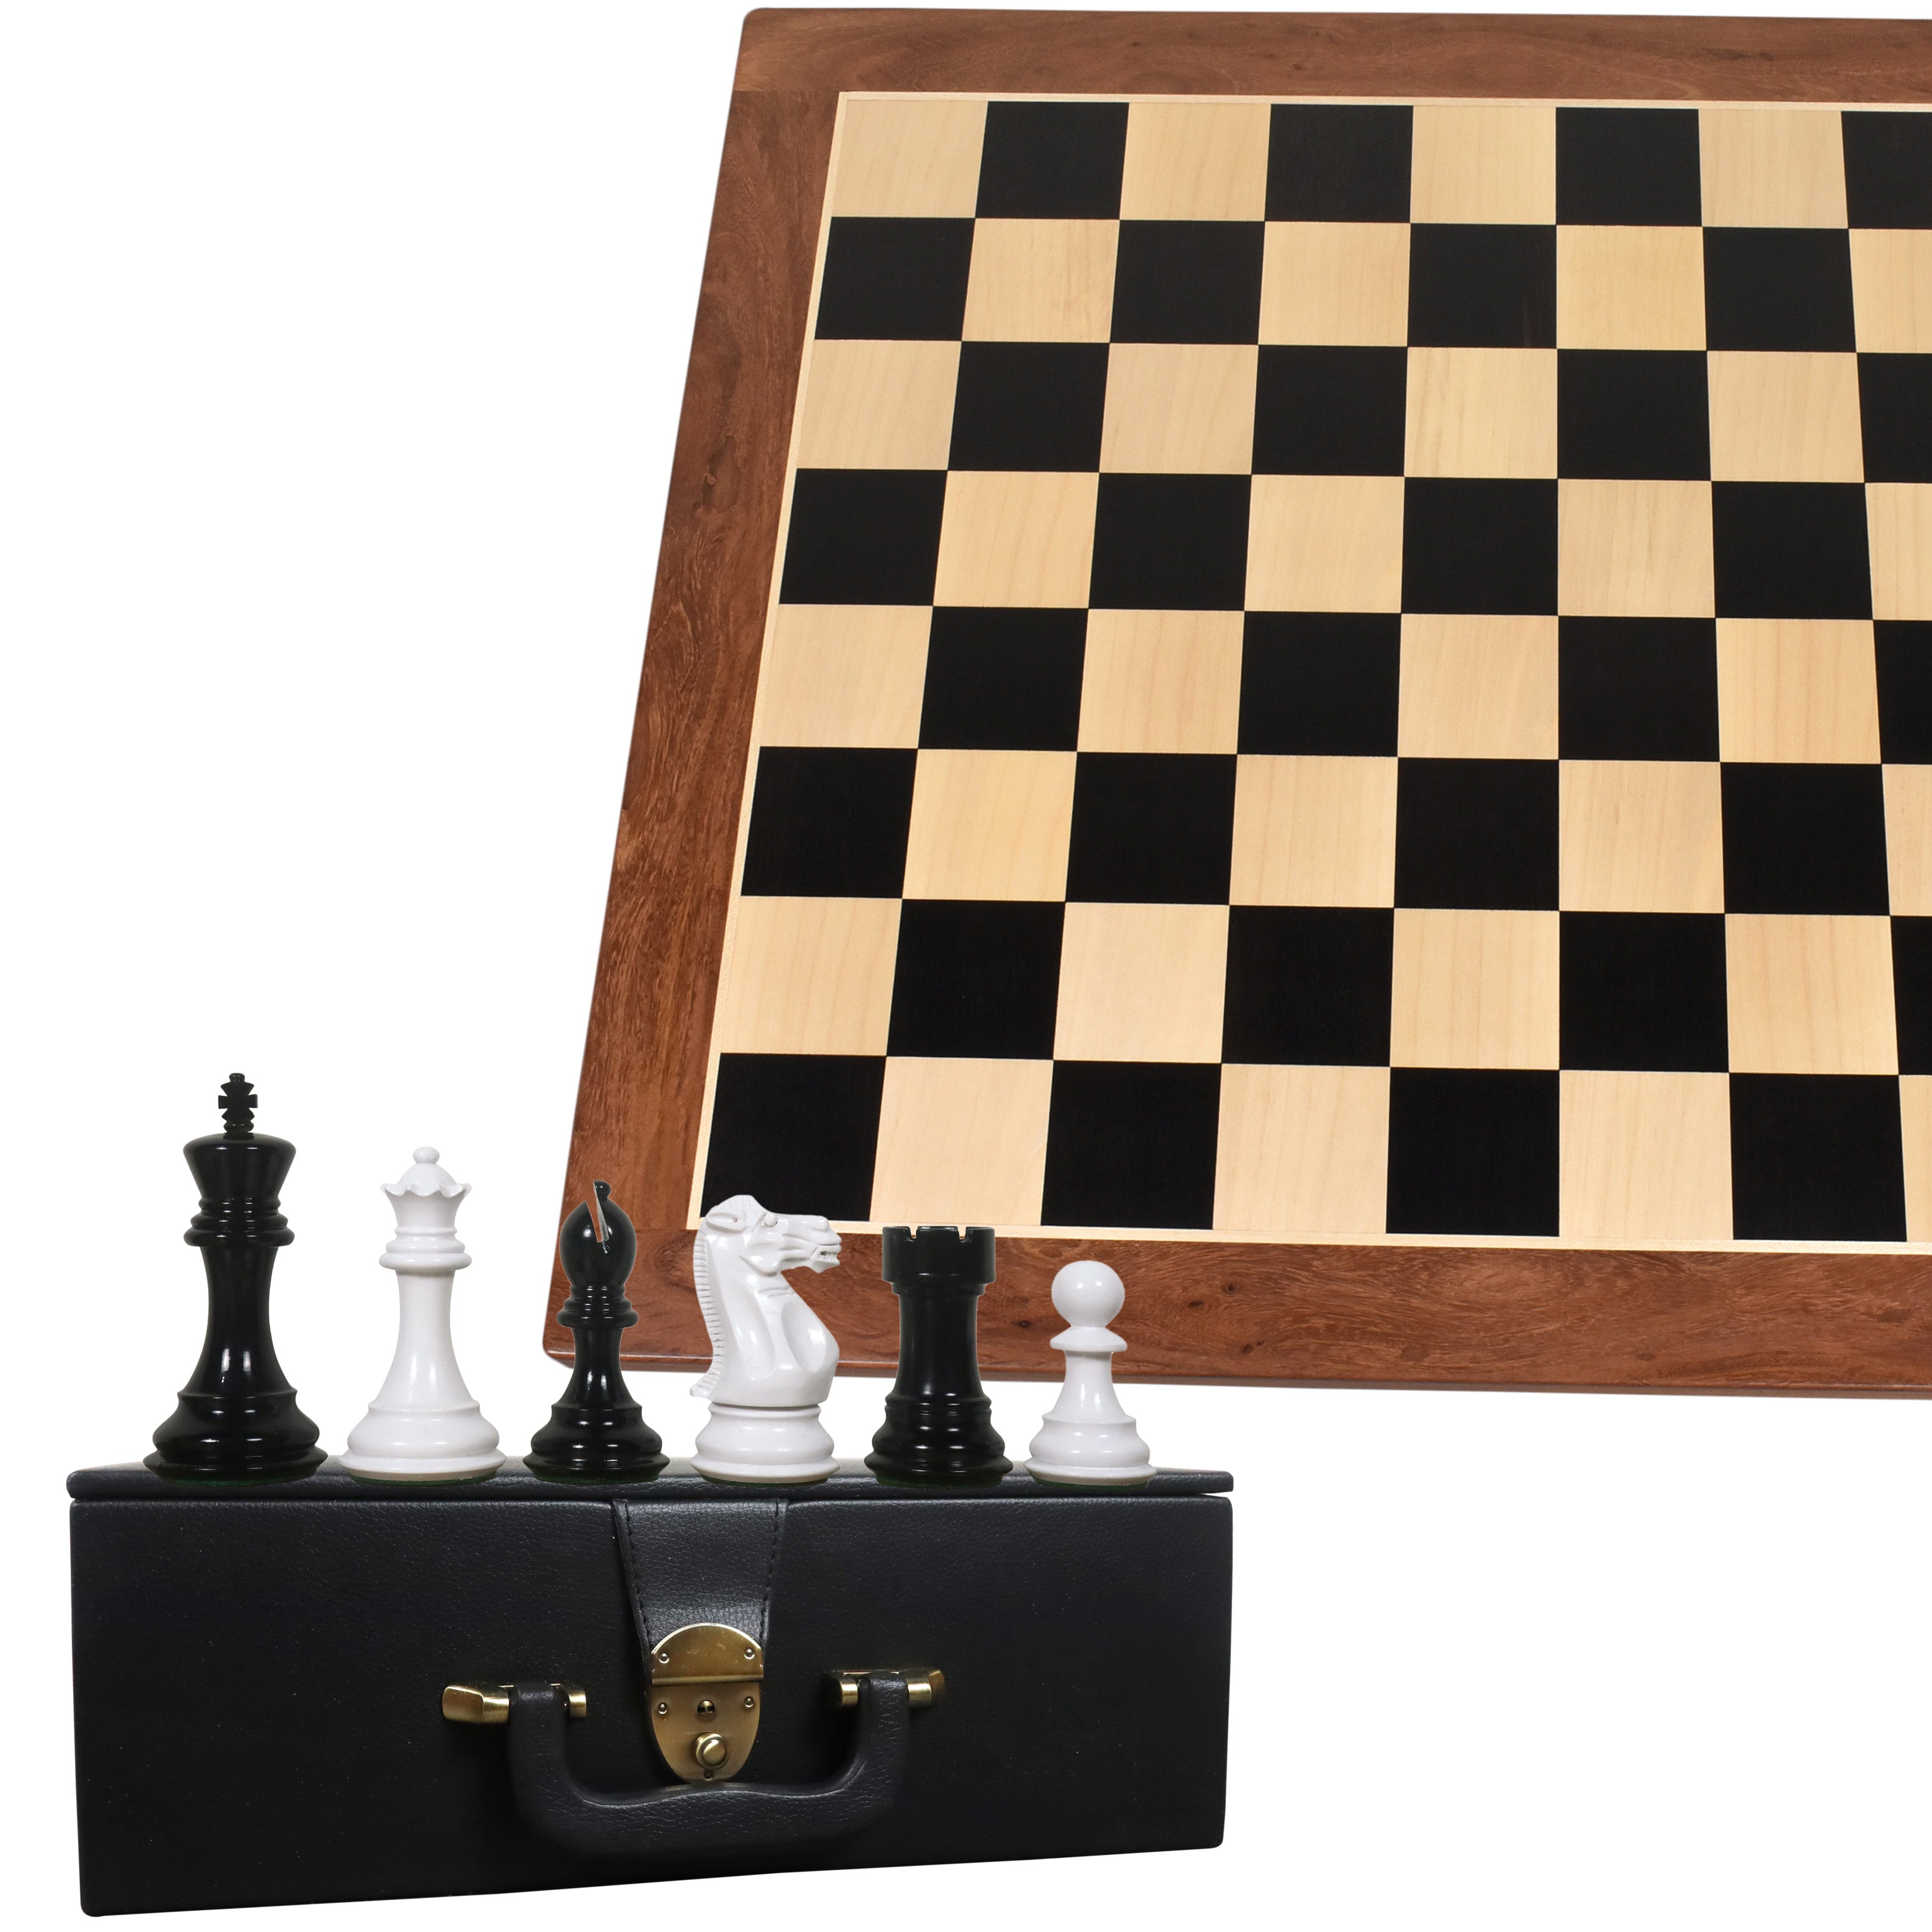 Staunton Chess Pieces by GrowUpSmart with Extra Queens | Size: Small - King  Height: 2.5 inch | Wood